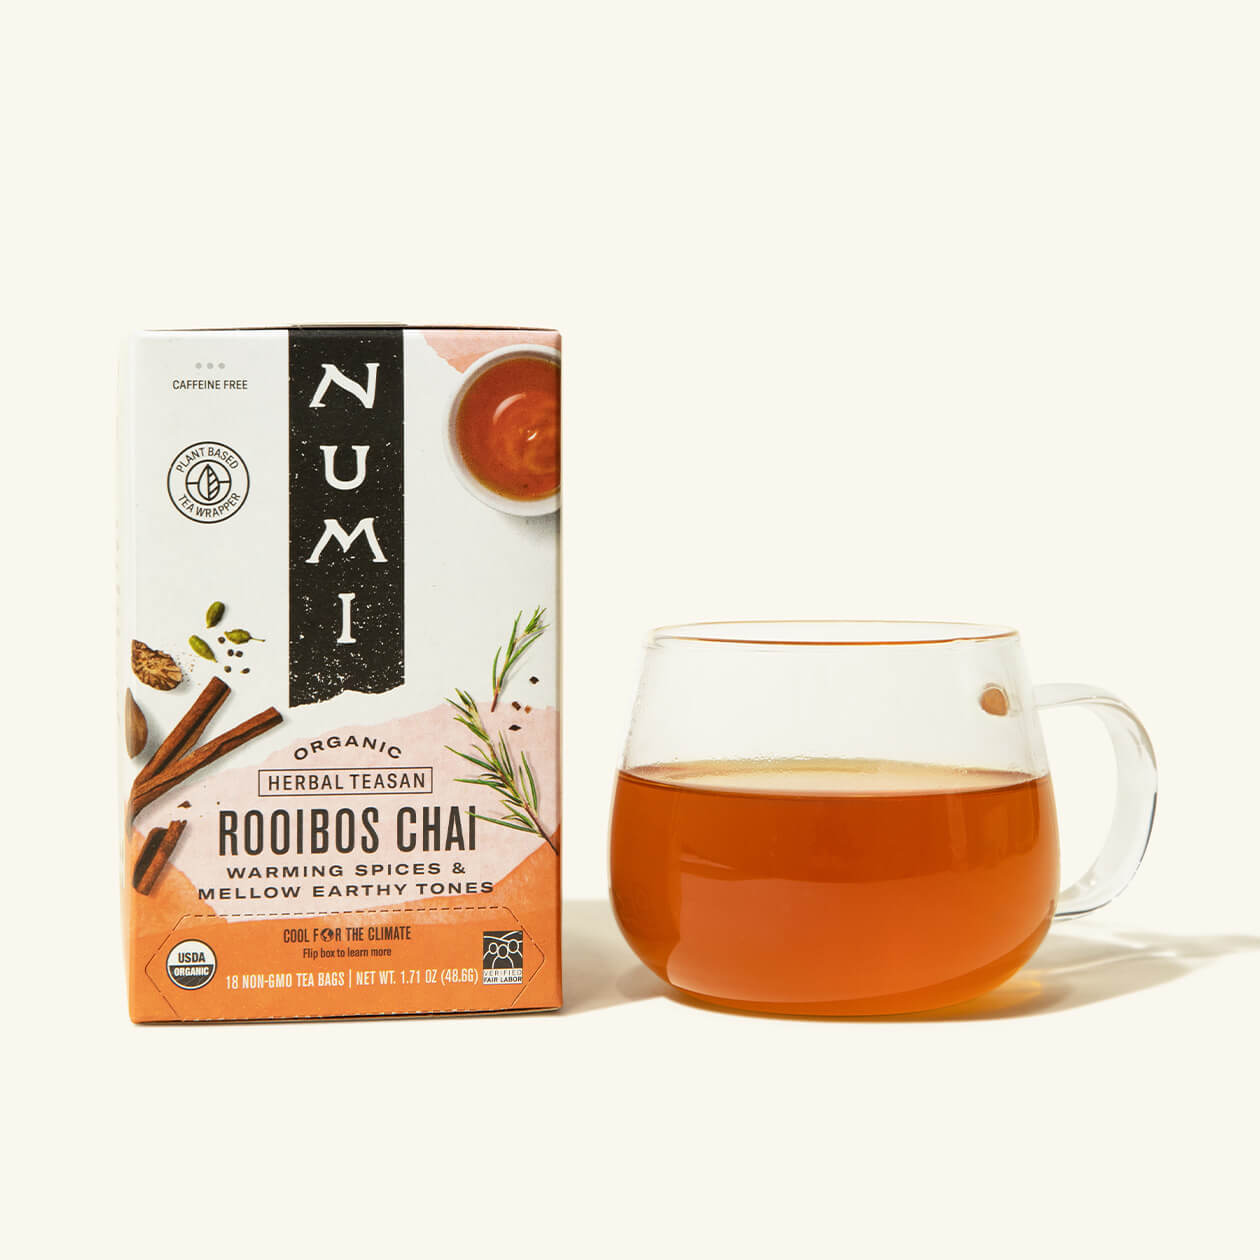 A box of Numi's Rooibos Chai next to a brewed cup of tea in a clear cup